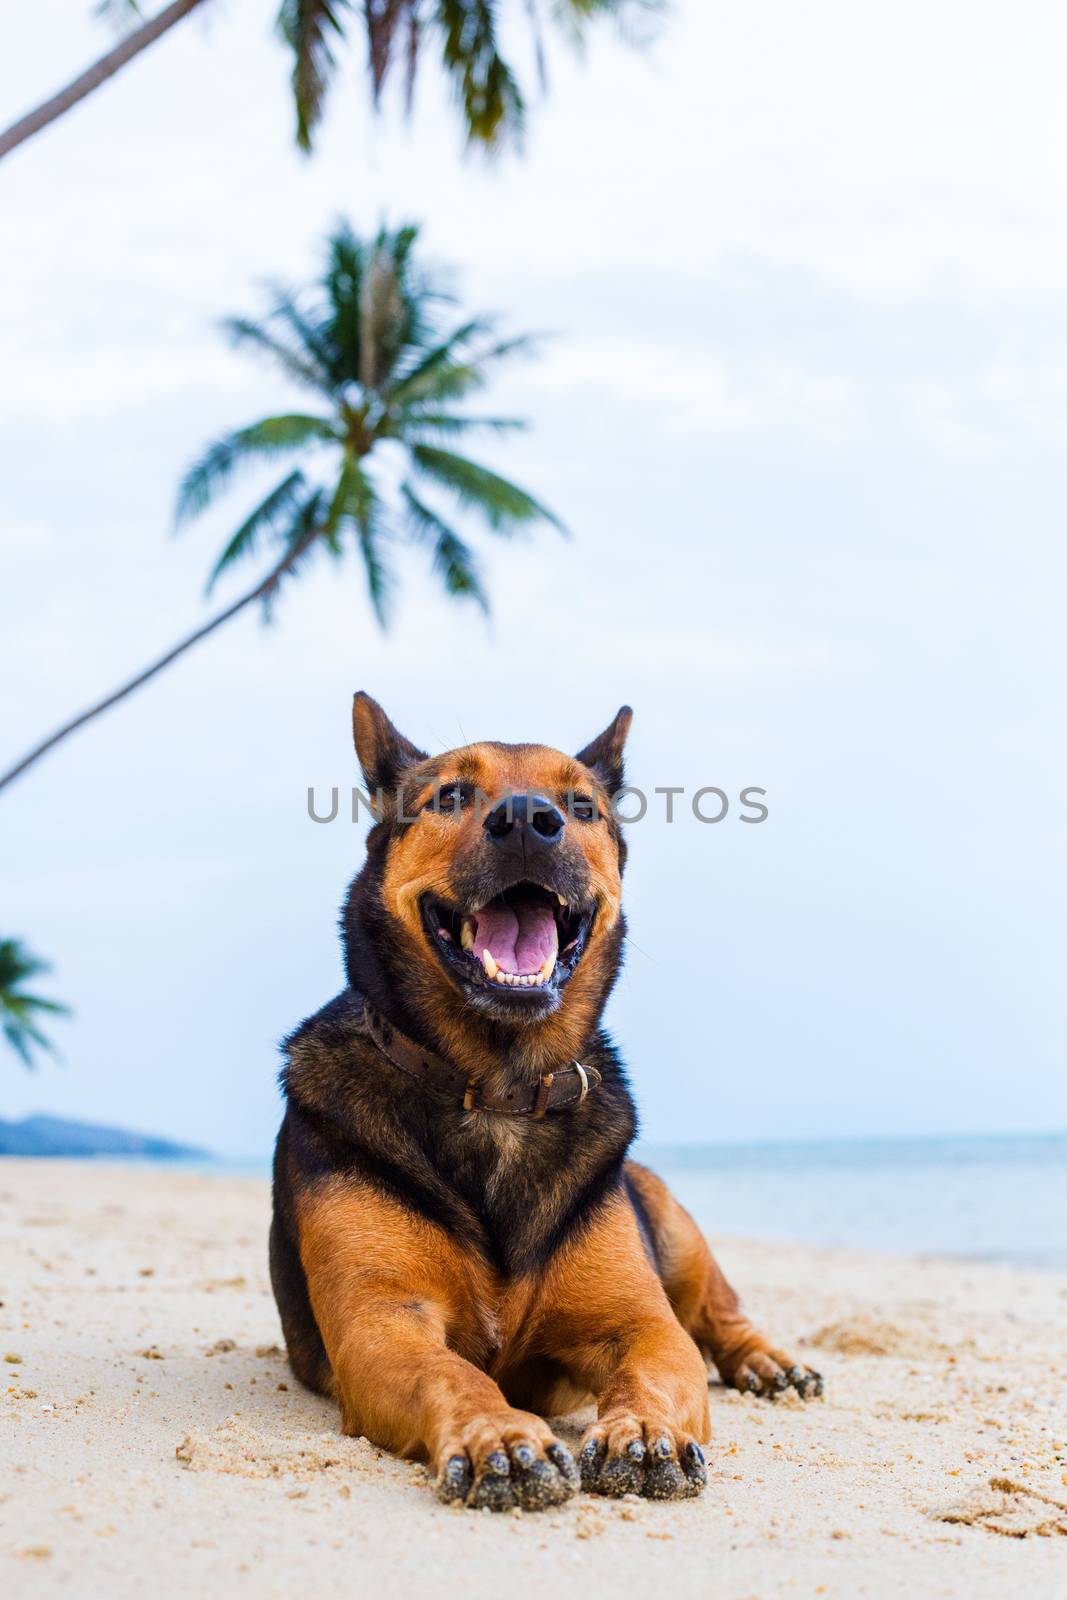 A happy dog relaxing on the beach. by Bowonpat